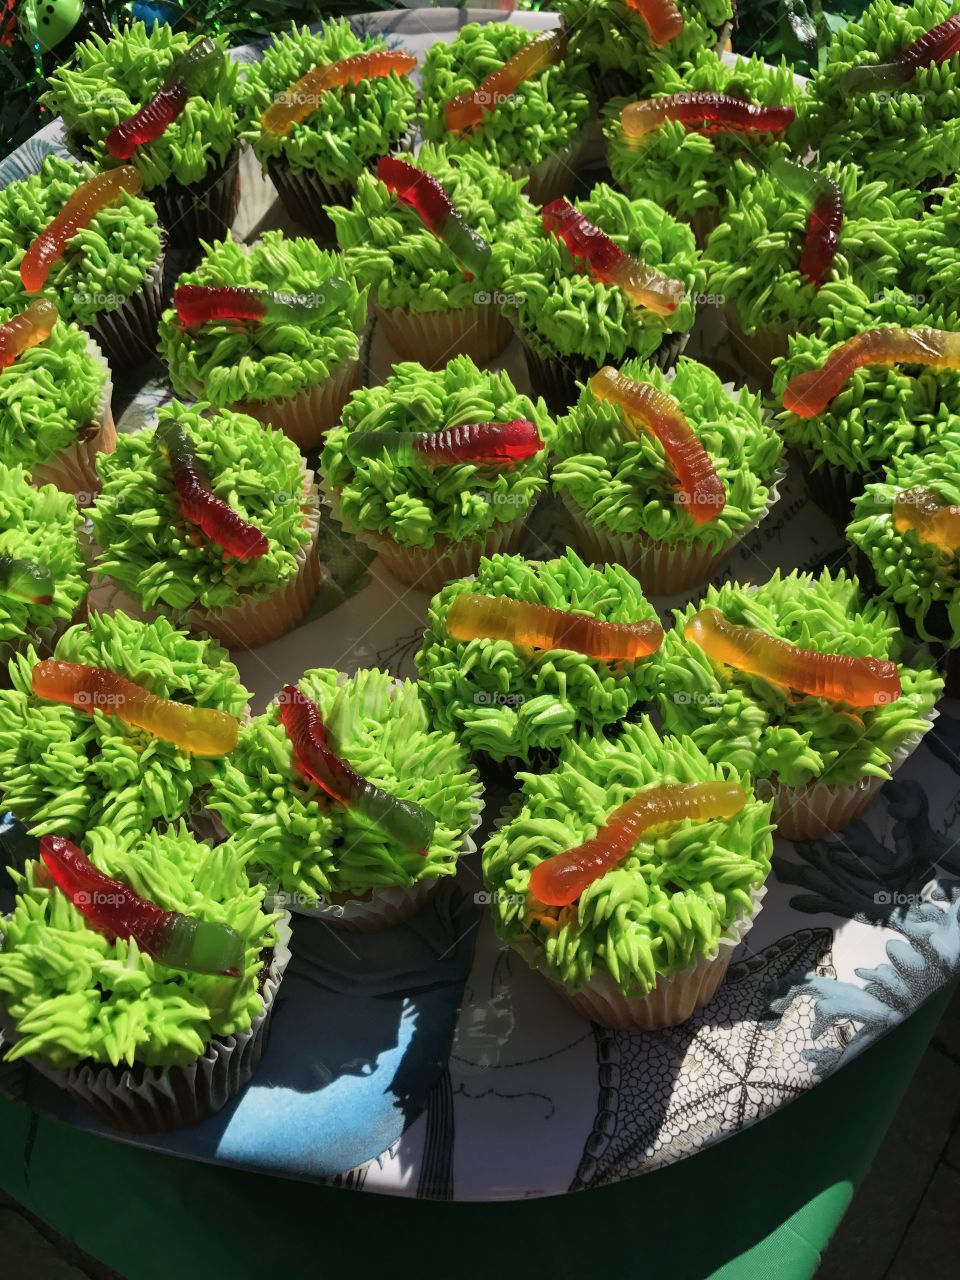 cupcakes with grass and worms 